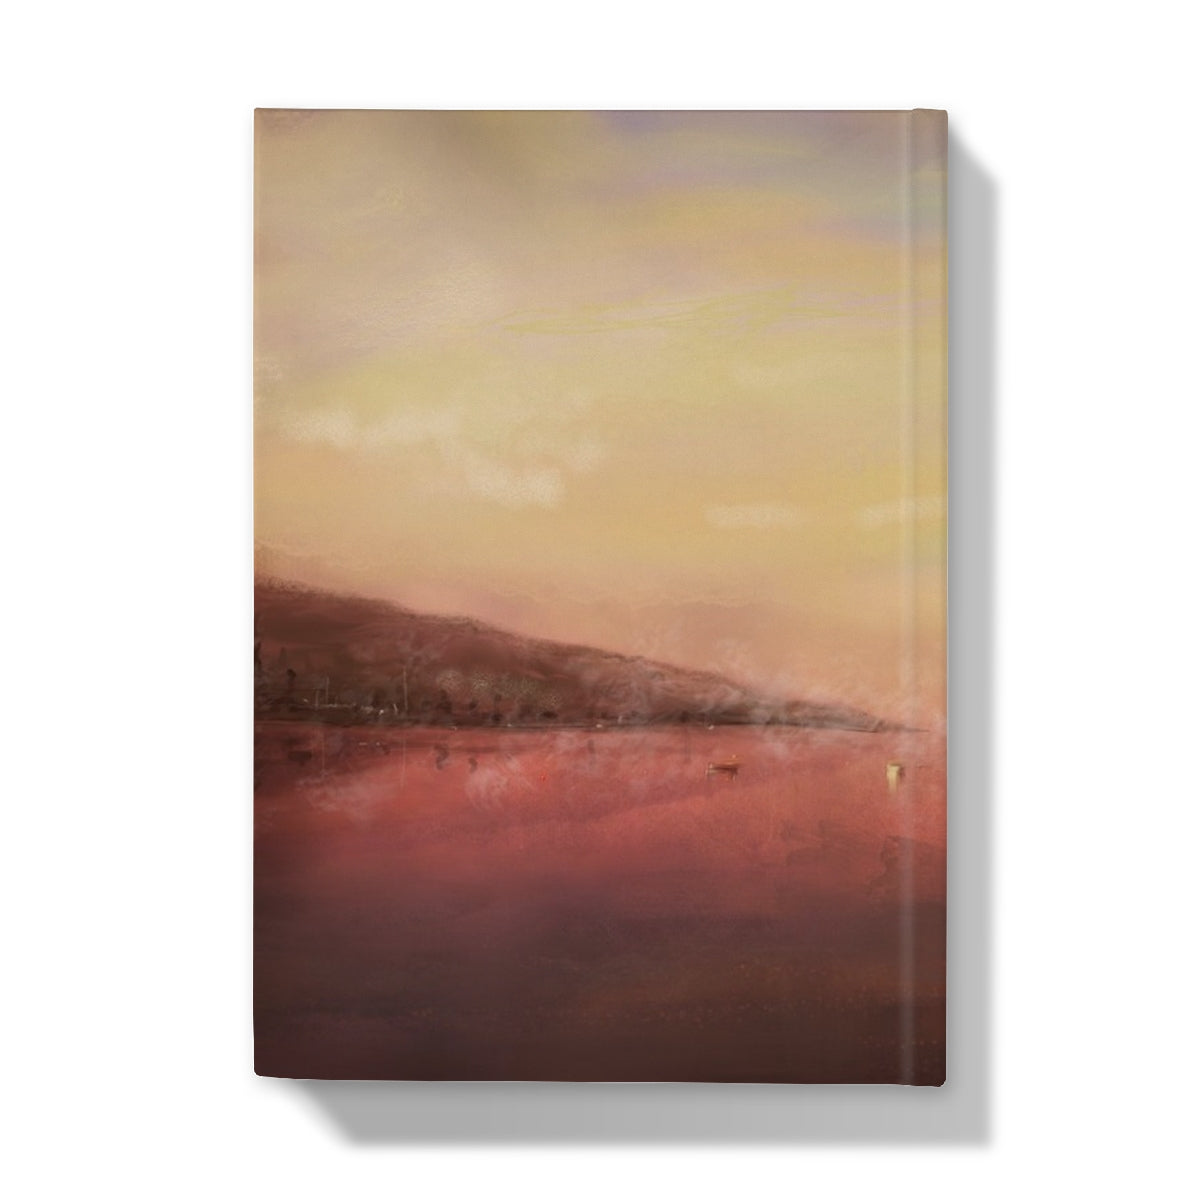 Loch Tay Art Gifts Hardback Journal-Journals & Notebooks-Scottish Lochs & Mountains Art Gallery-Paintings, Prints, Homeware, Art Gifts From Scotland By Scottish Artist Kevin Hunter